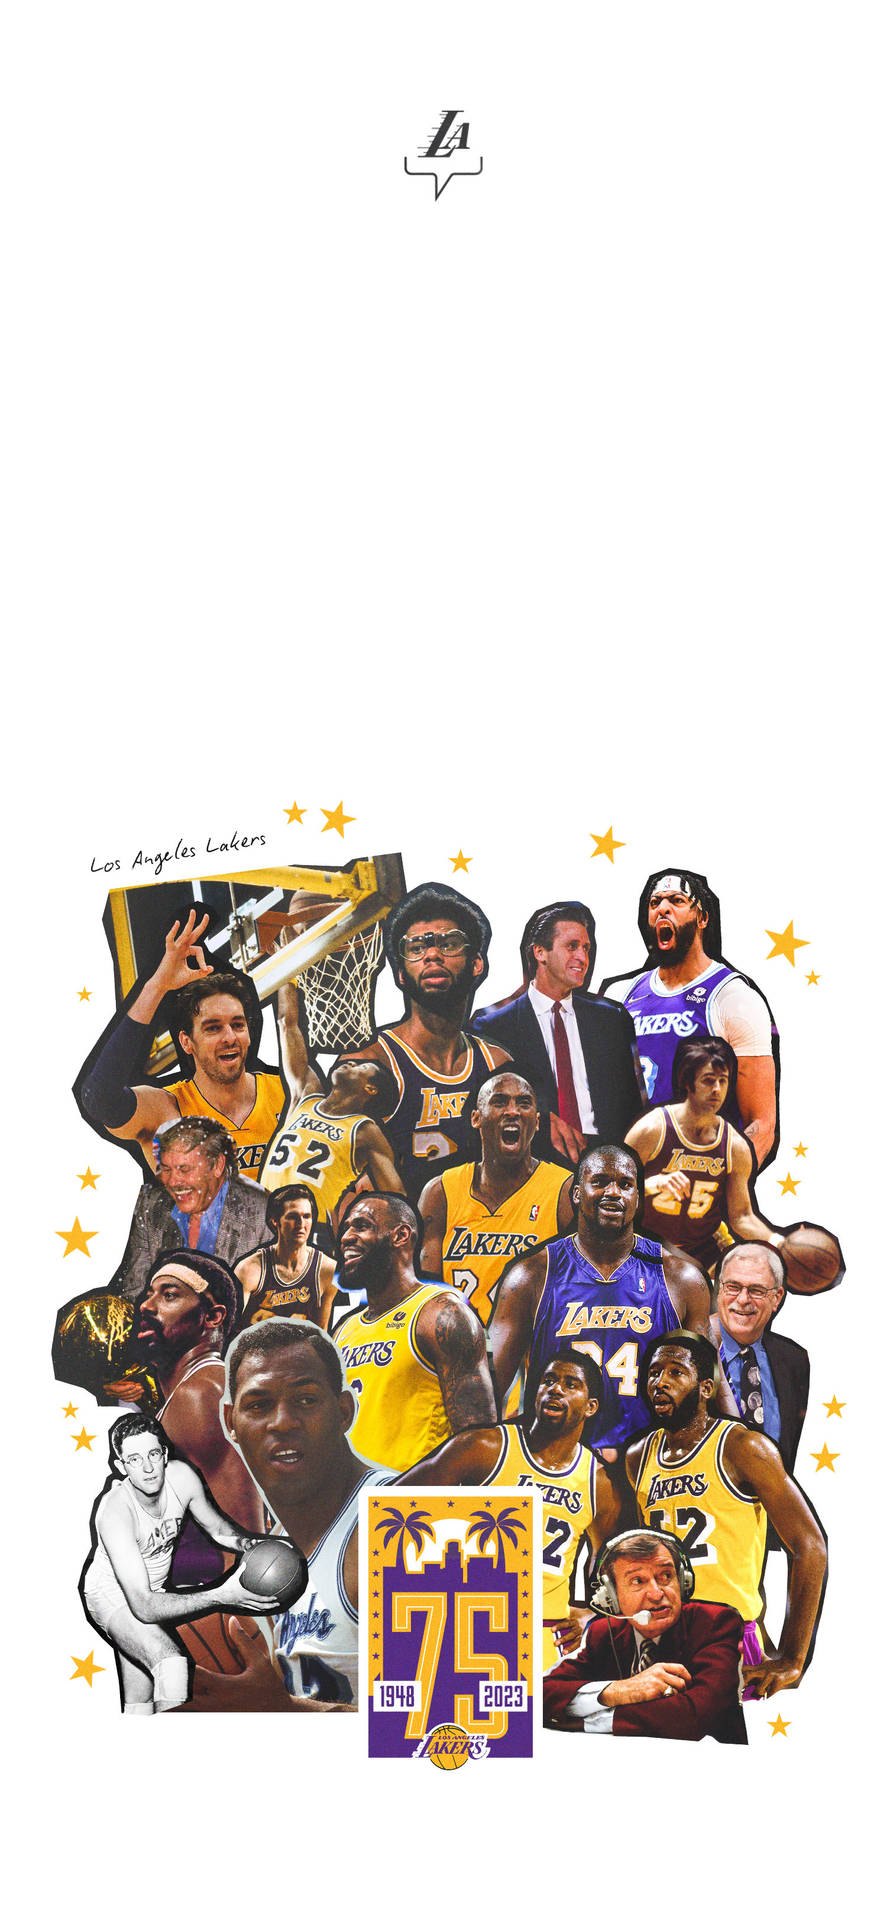 Show your Lakers pride with a personalized Lakers iPhone wallpaper. Wallpaper